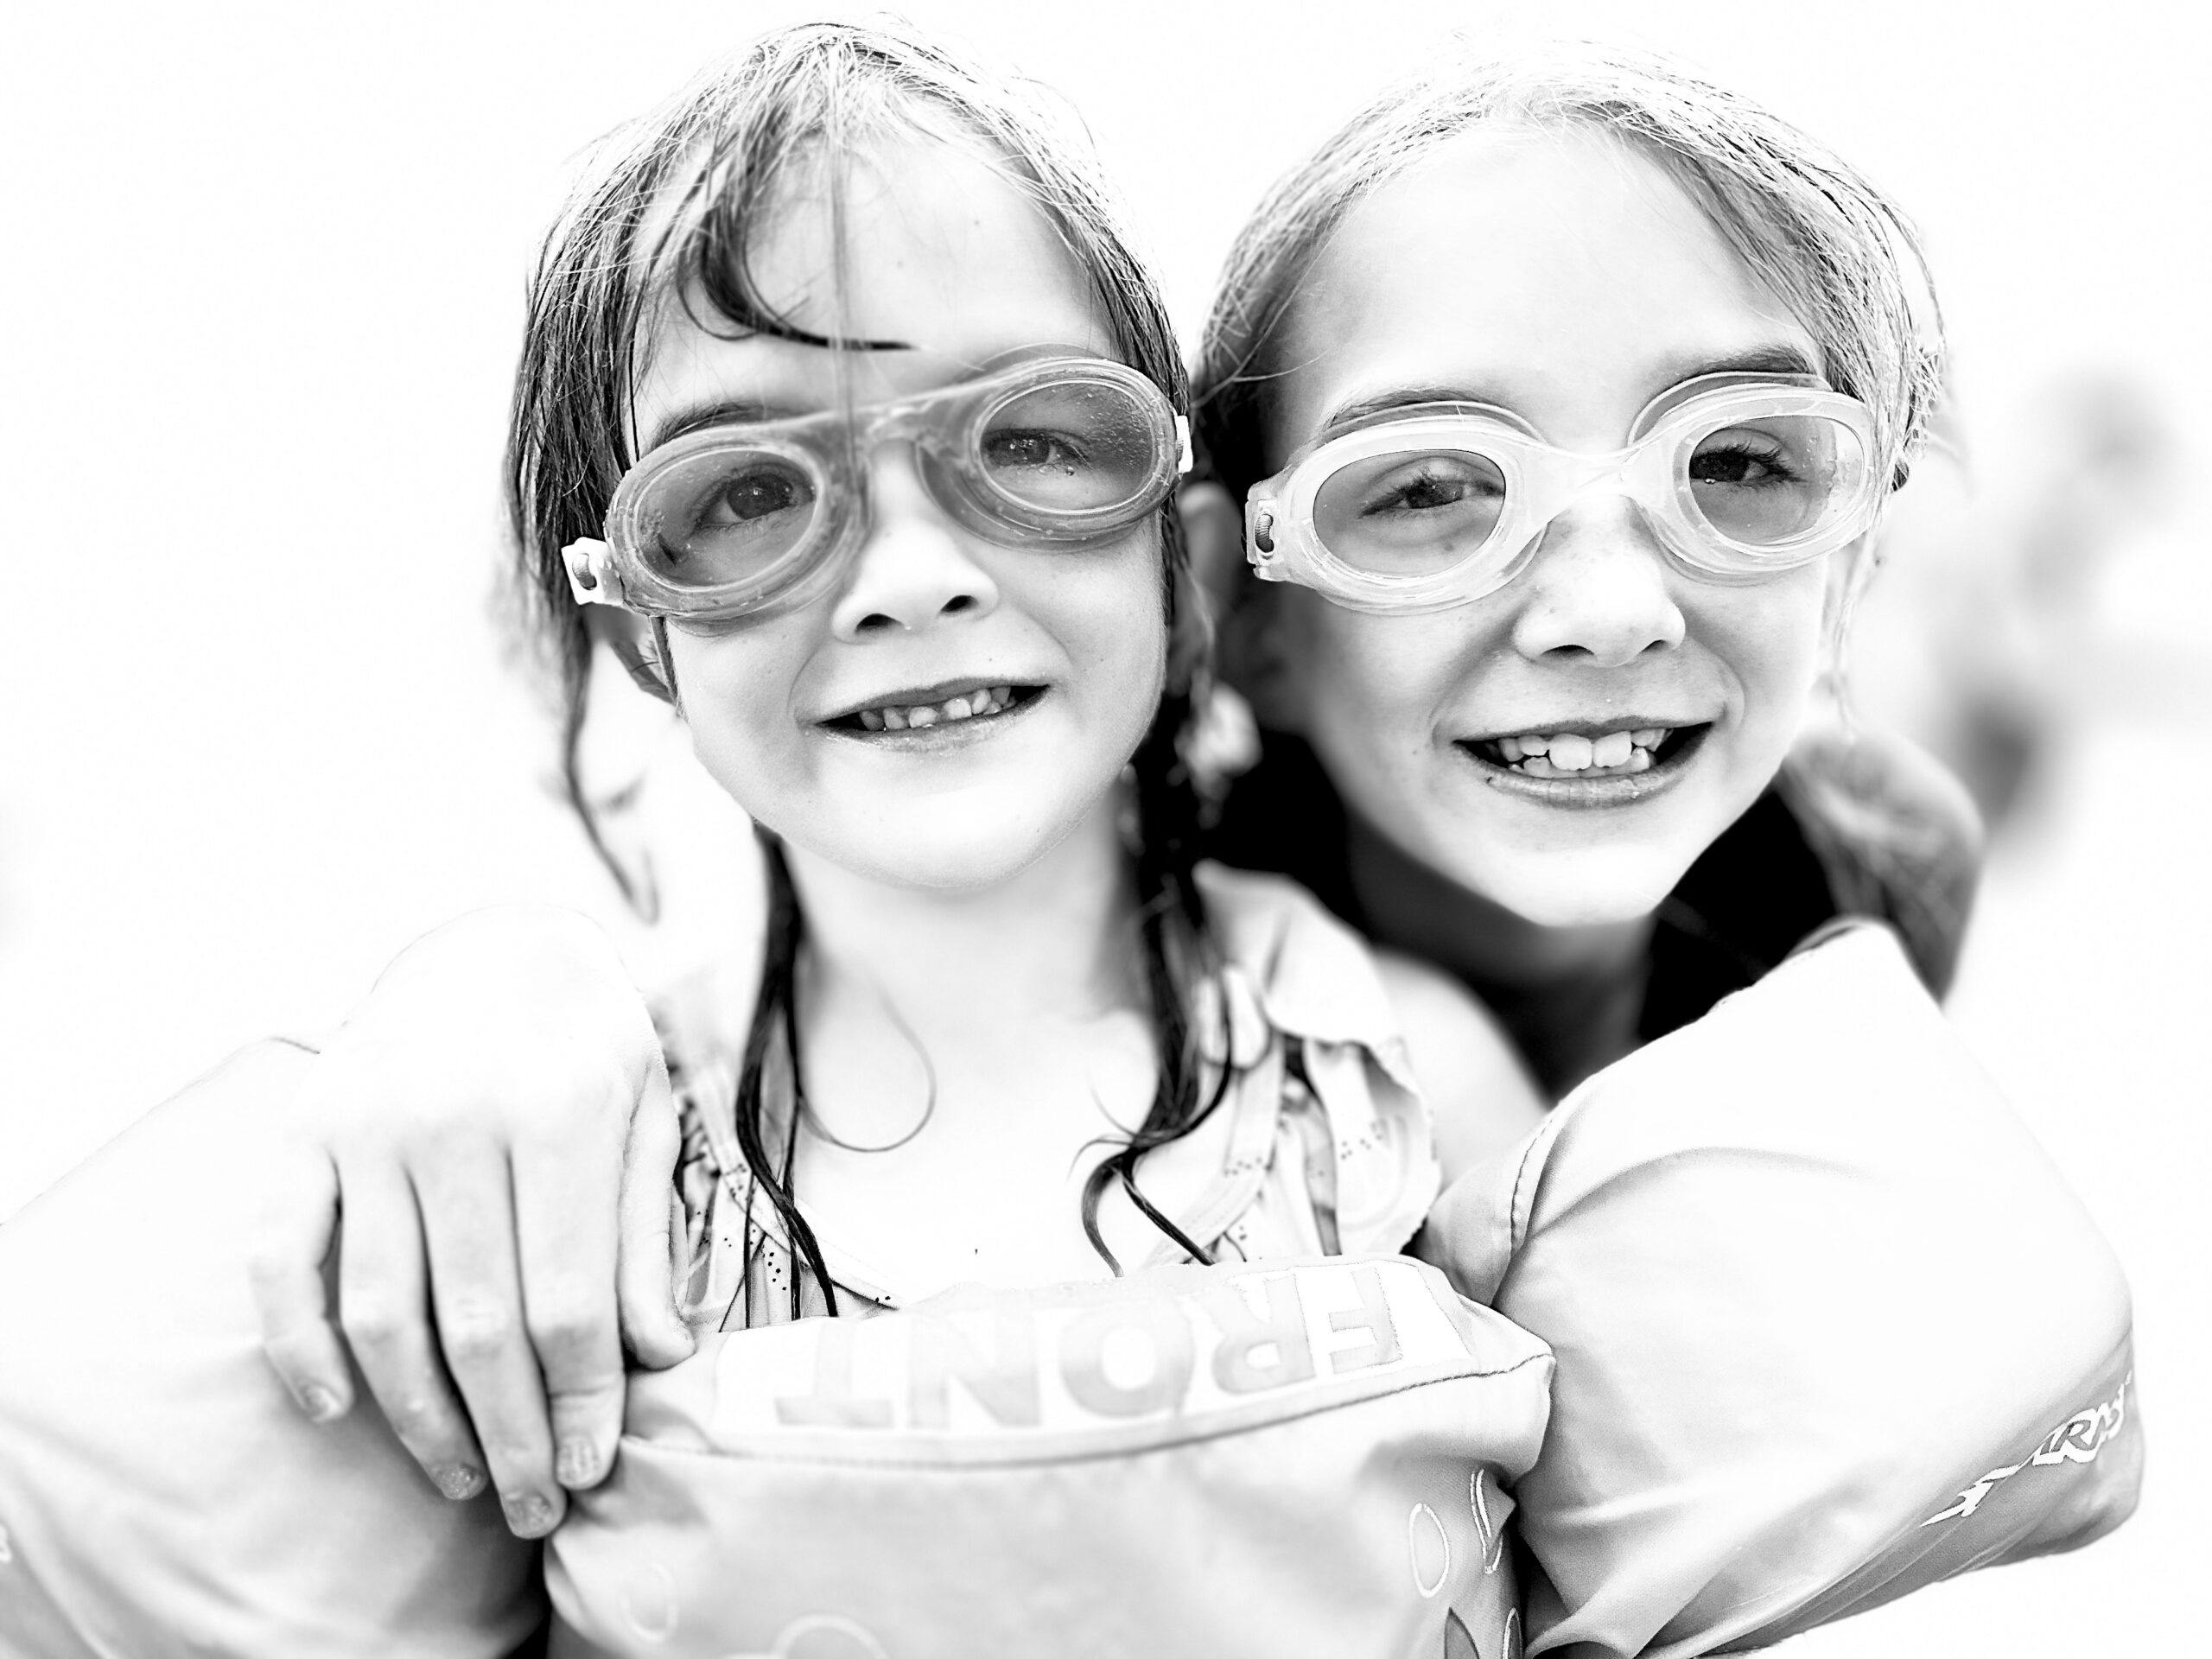 Two girls with goggles and swimsuits posing for a photo.